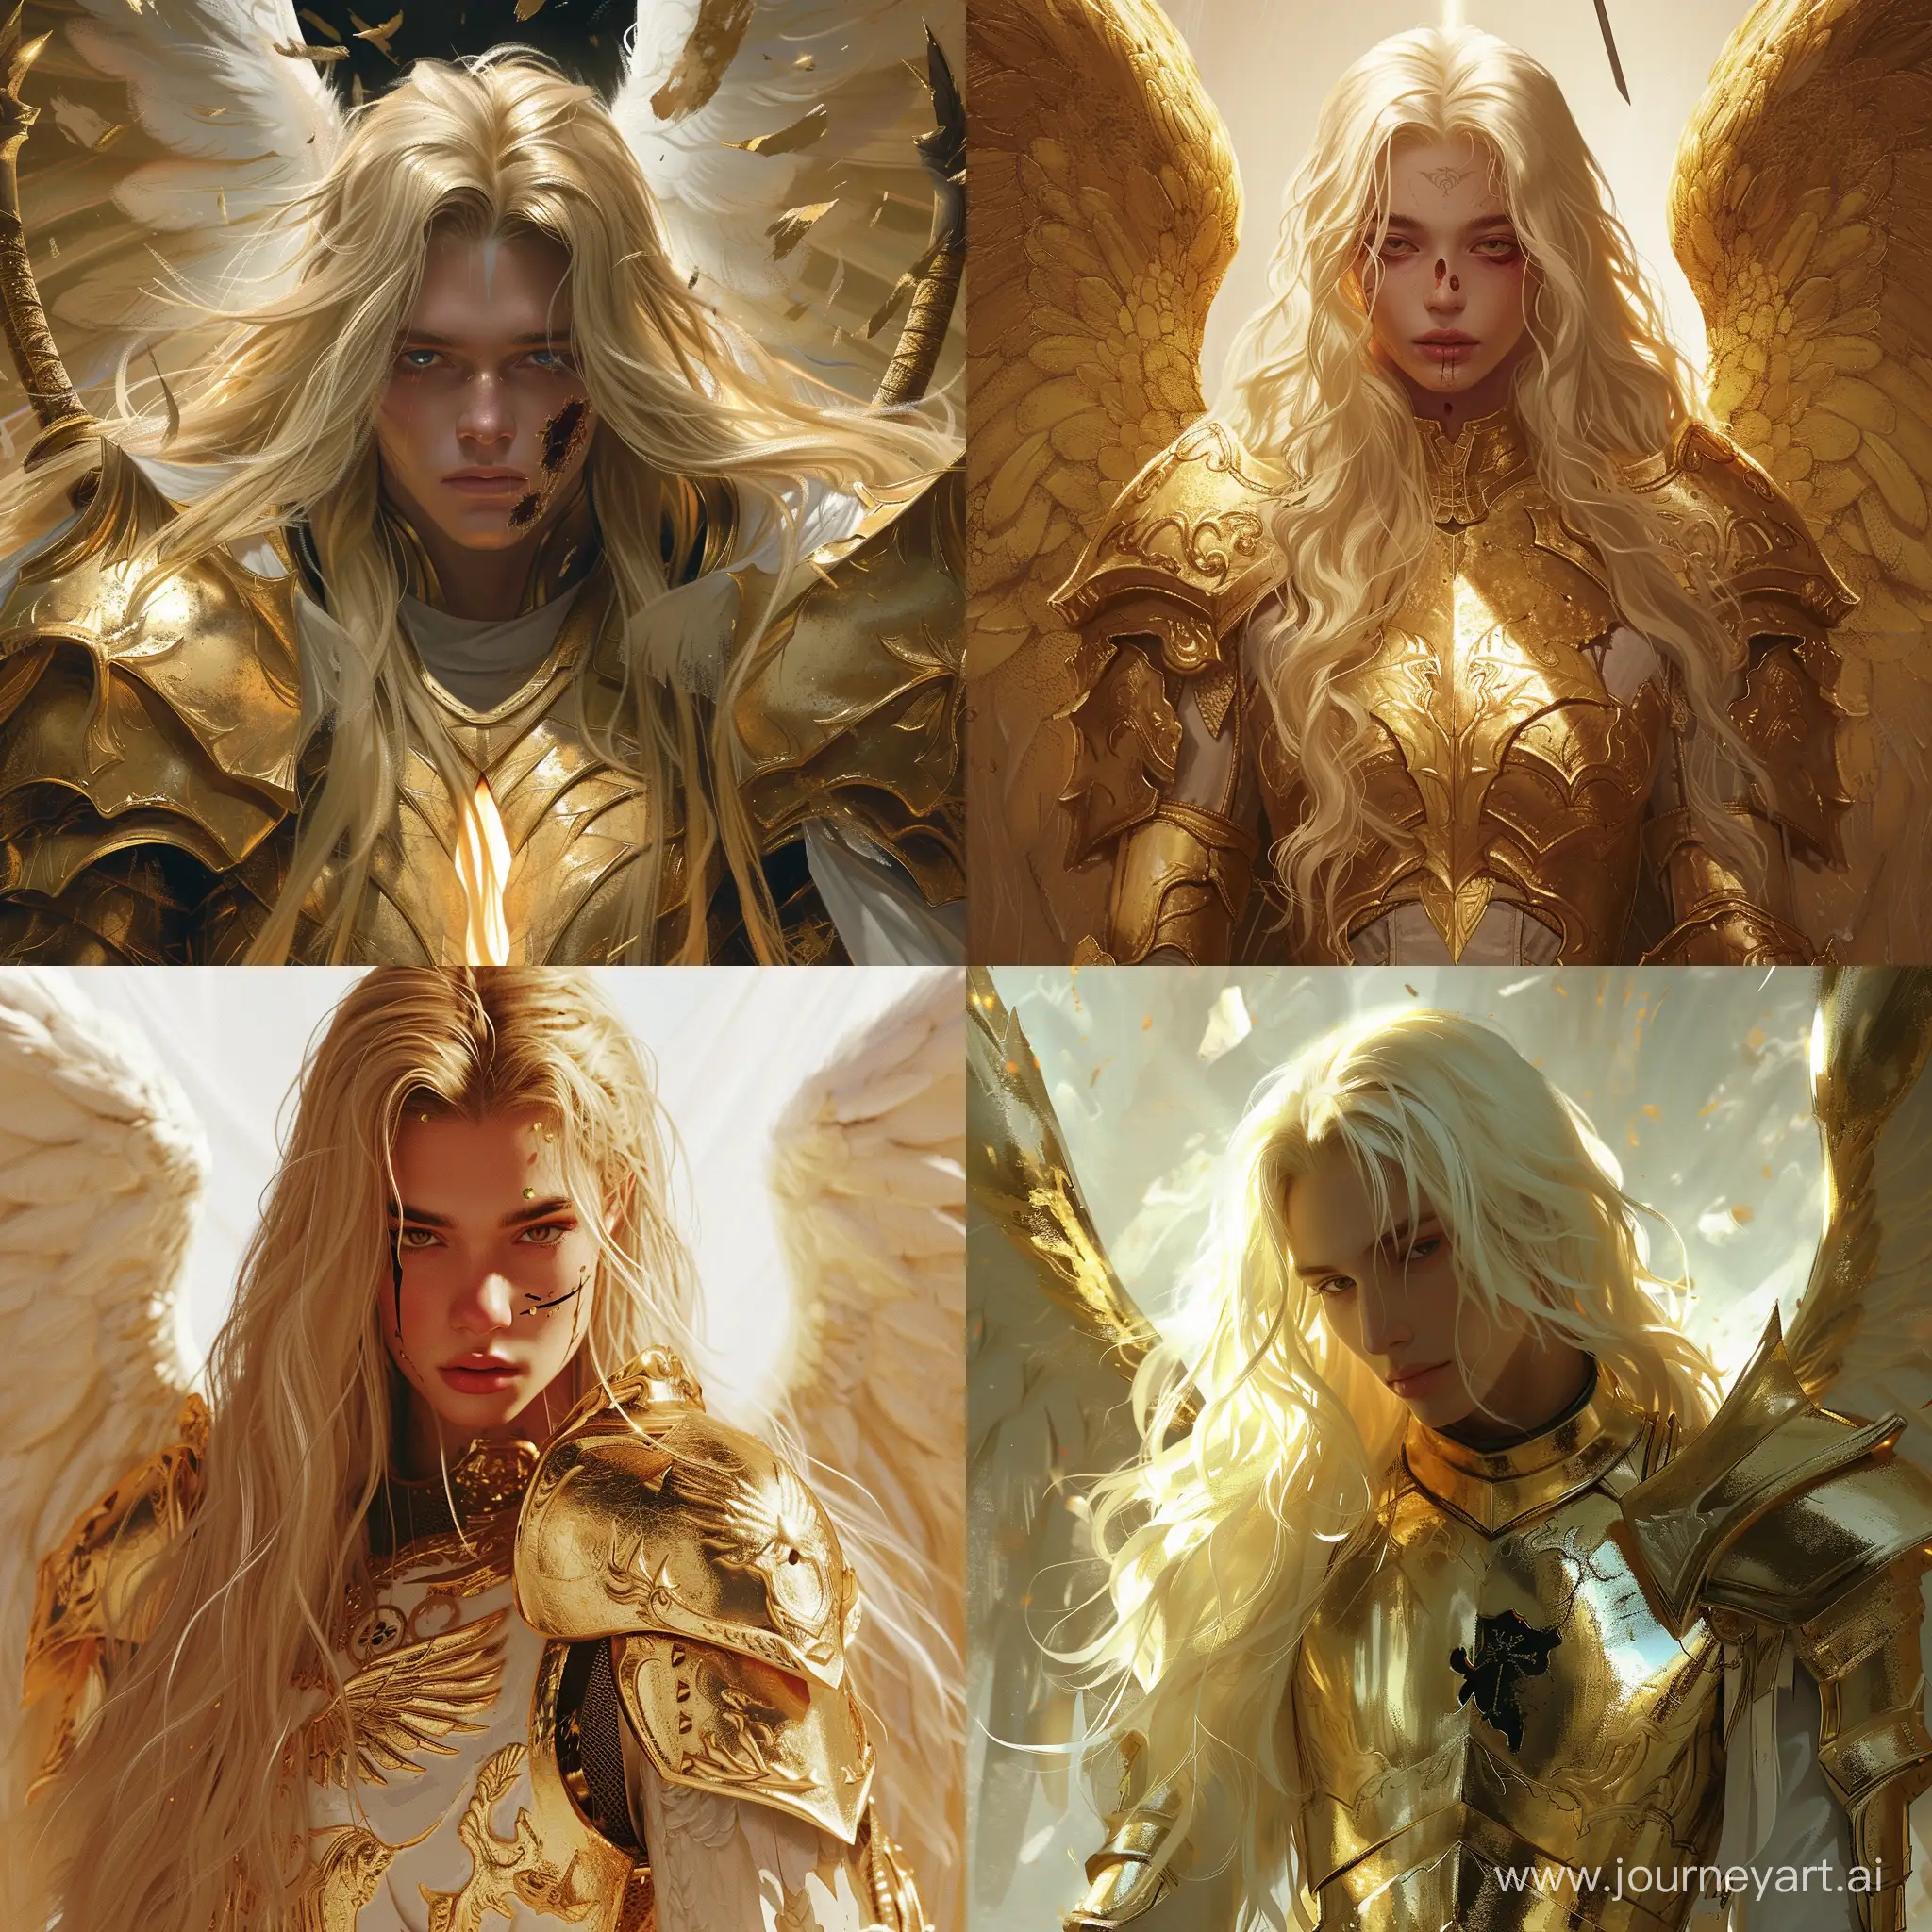 angel with golden armor, blond long hair and a hole in the face